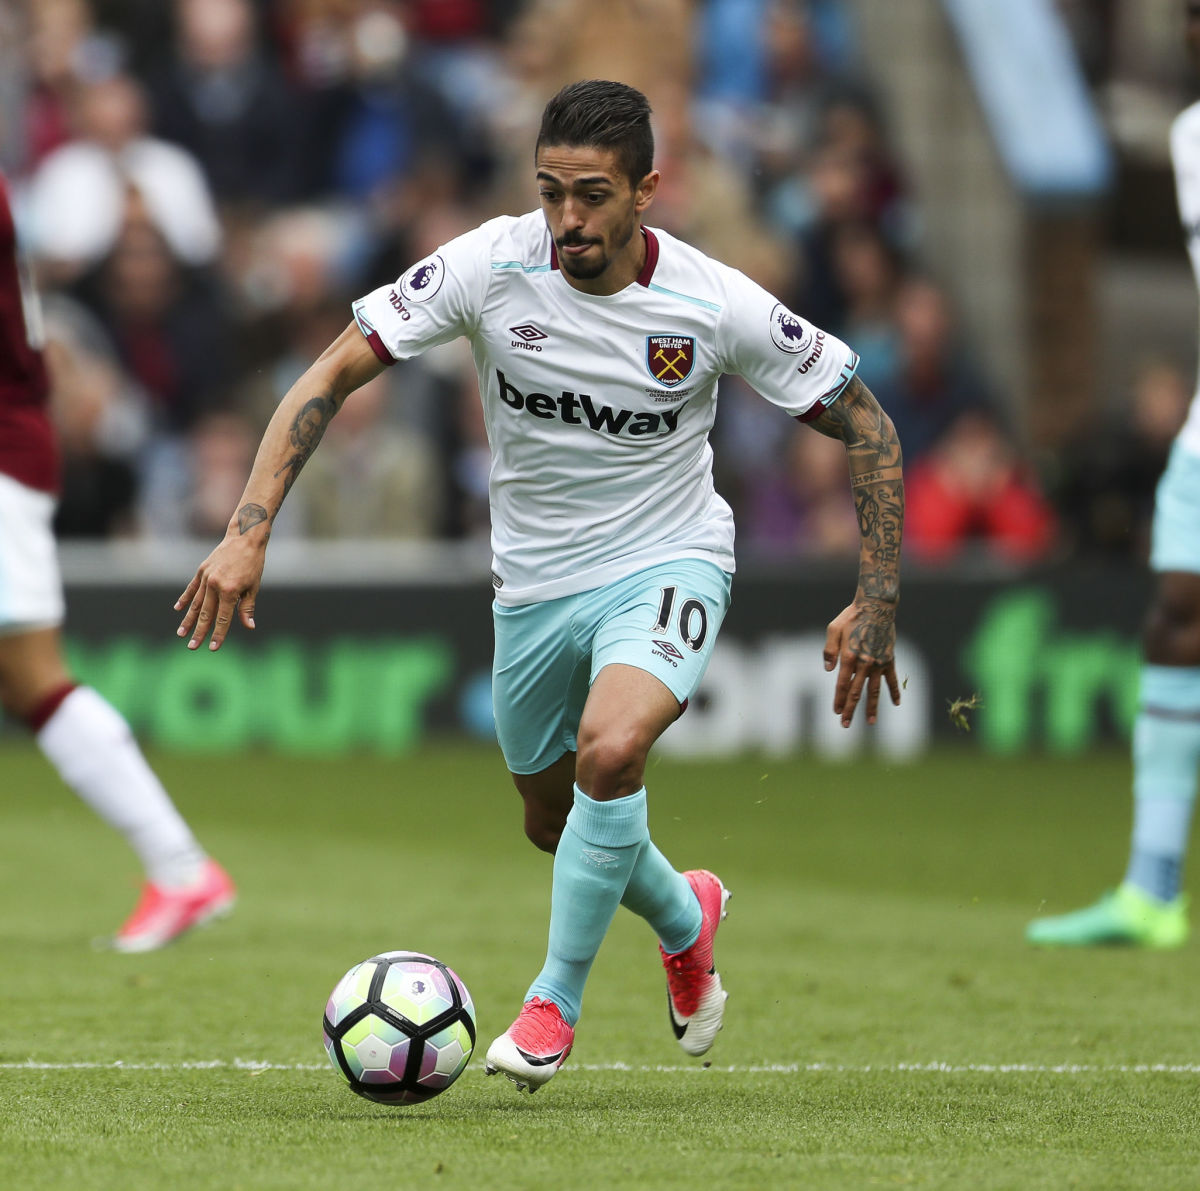 BURNLEY, ENGLAND - MAY 21: Manuel Lanzini of West Ham United during the the Premier League match between Burnley and West Ham United at Turf Moor on May 21, 2017 in Burnley, England. (Photo by Mark Robinson/Getty Images)